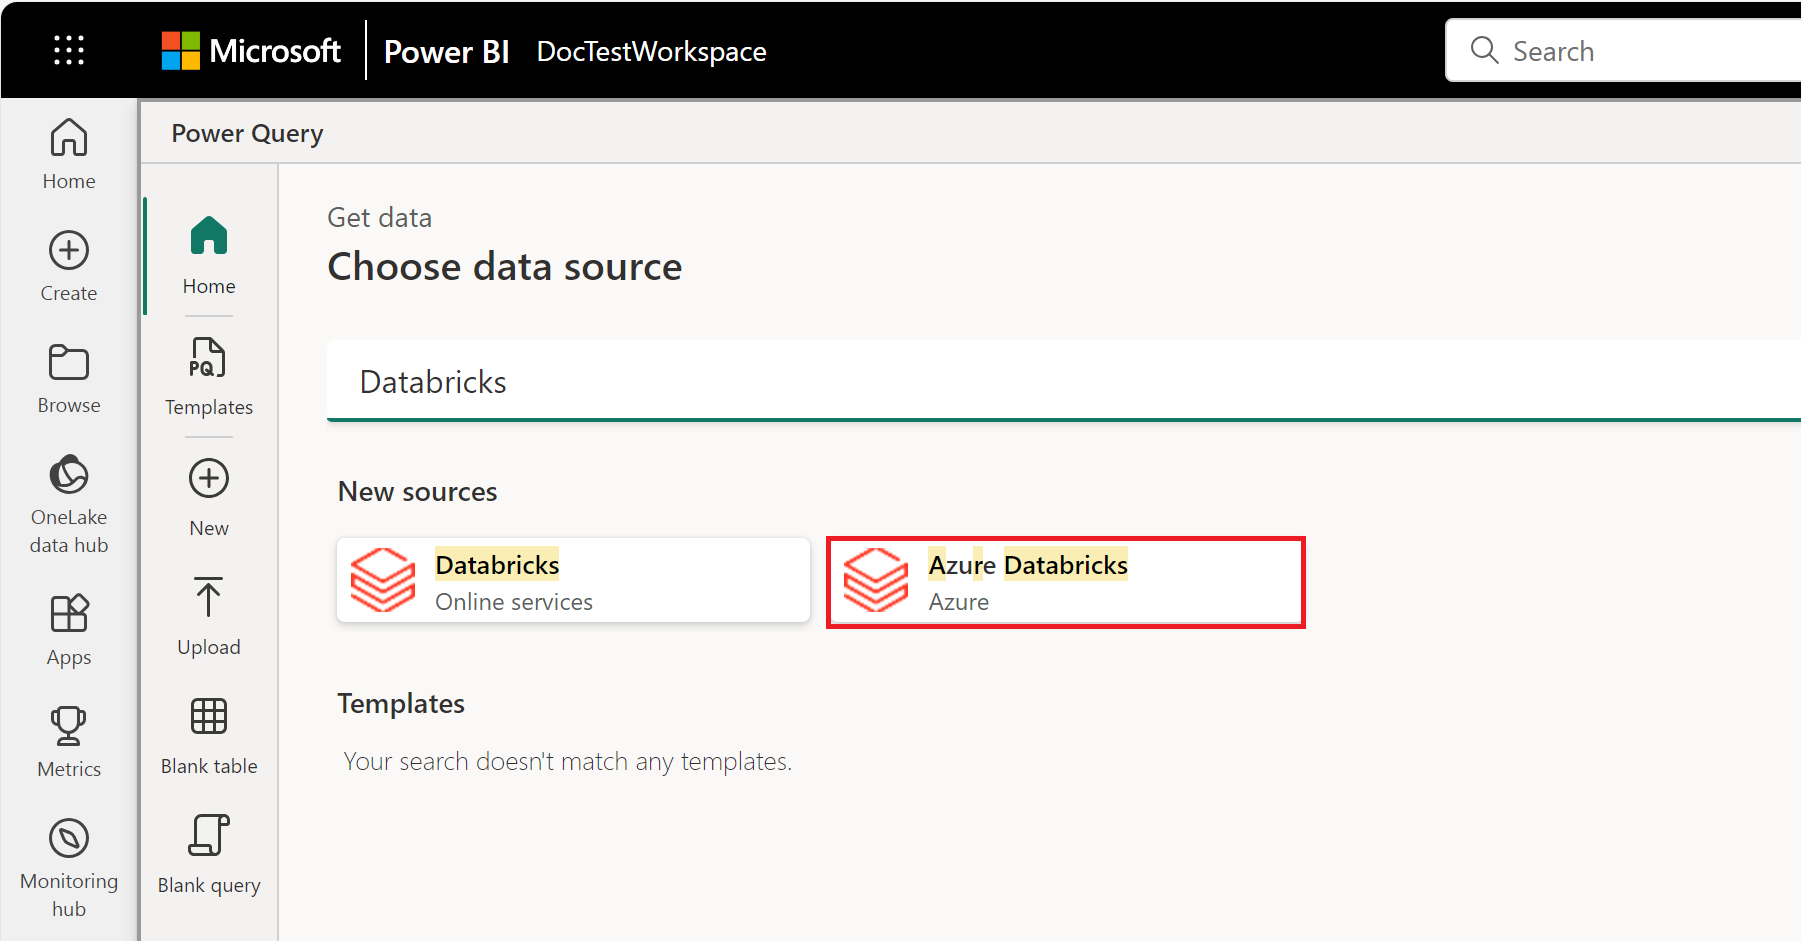 Image of the Databricks connectors.